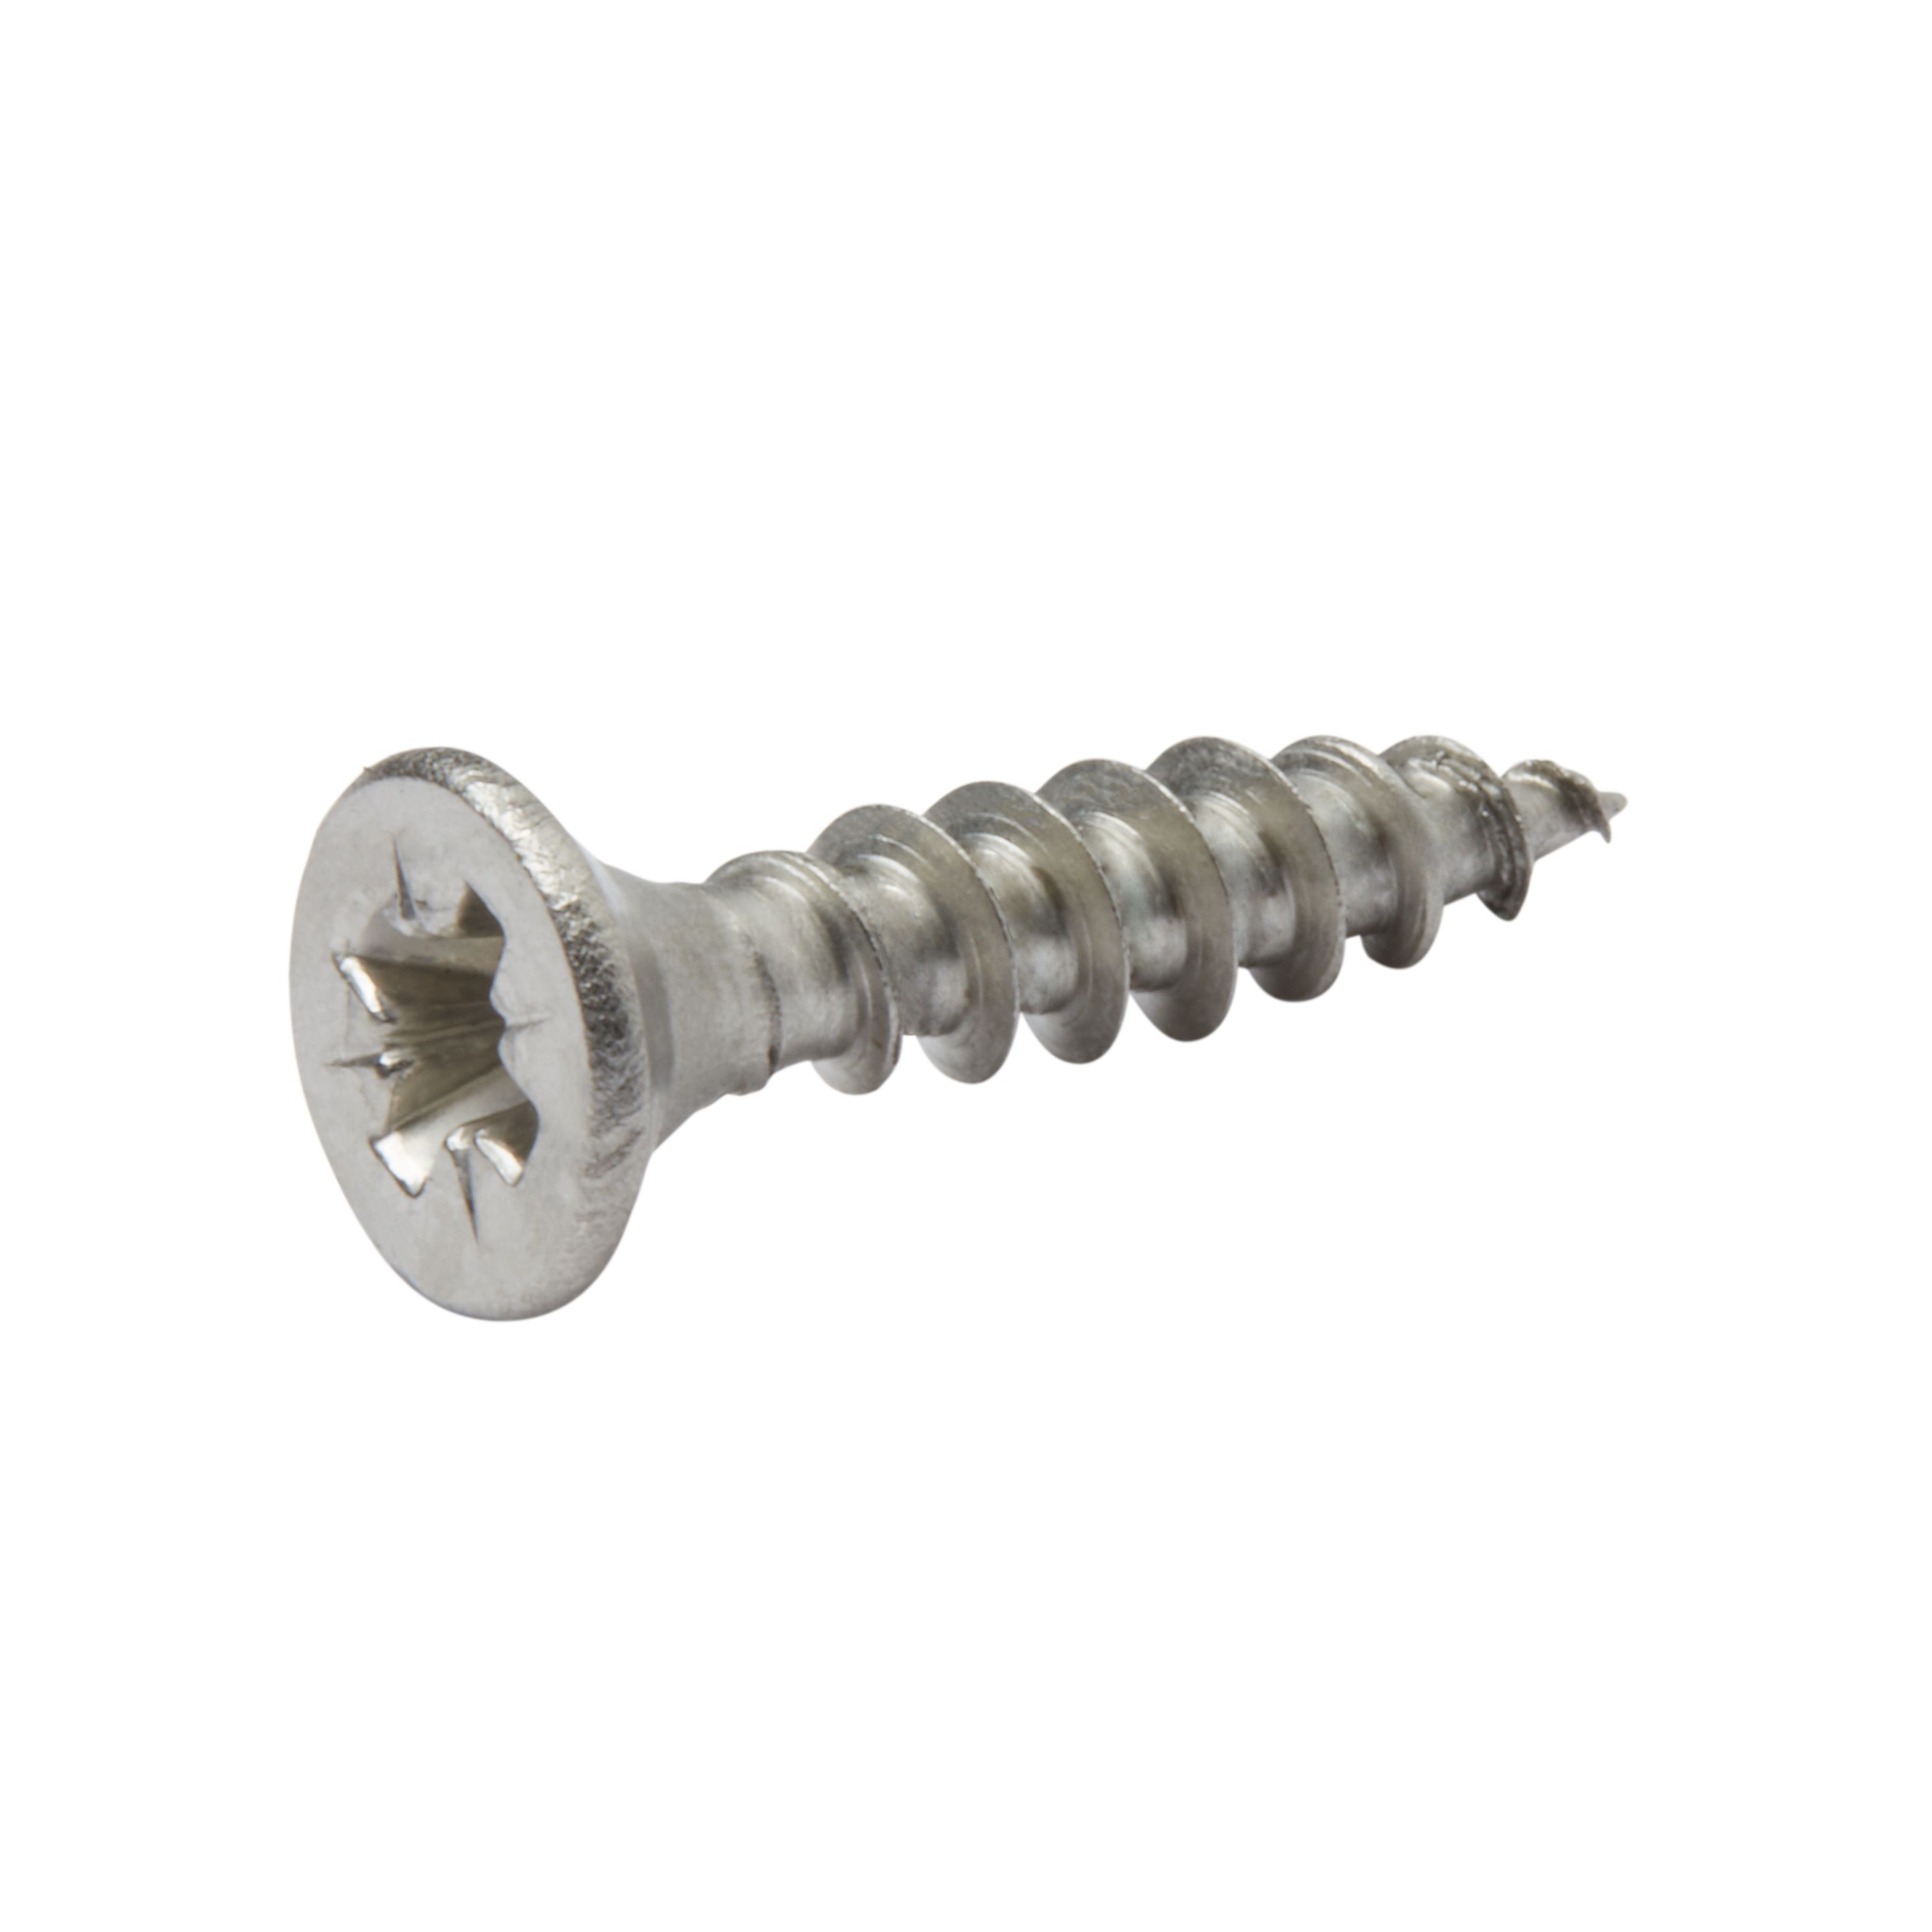 Diall Pozidriv Stainless steel Screw (Dia)4mm (L)20mm, Pack of 20